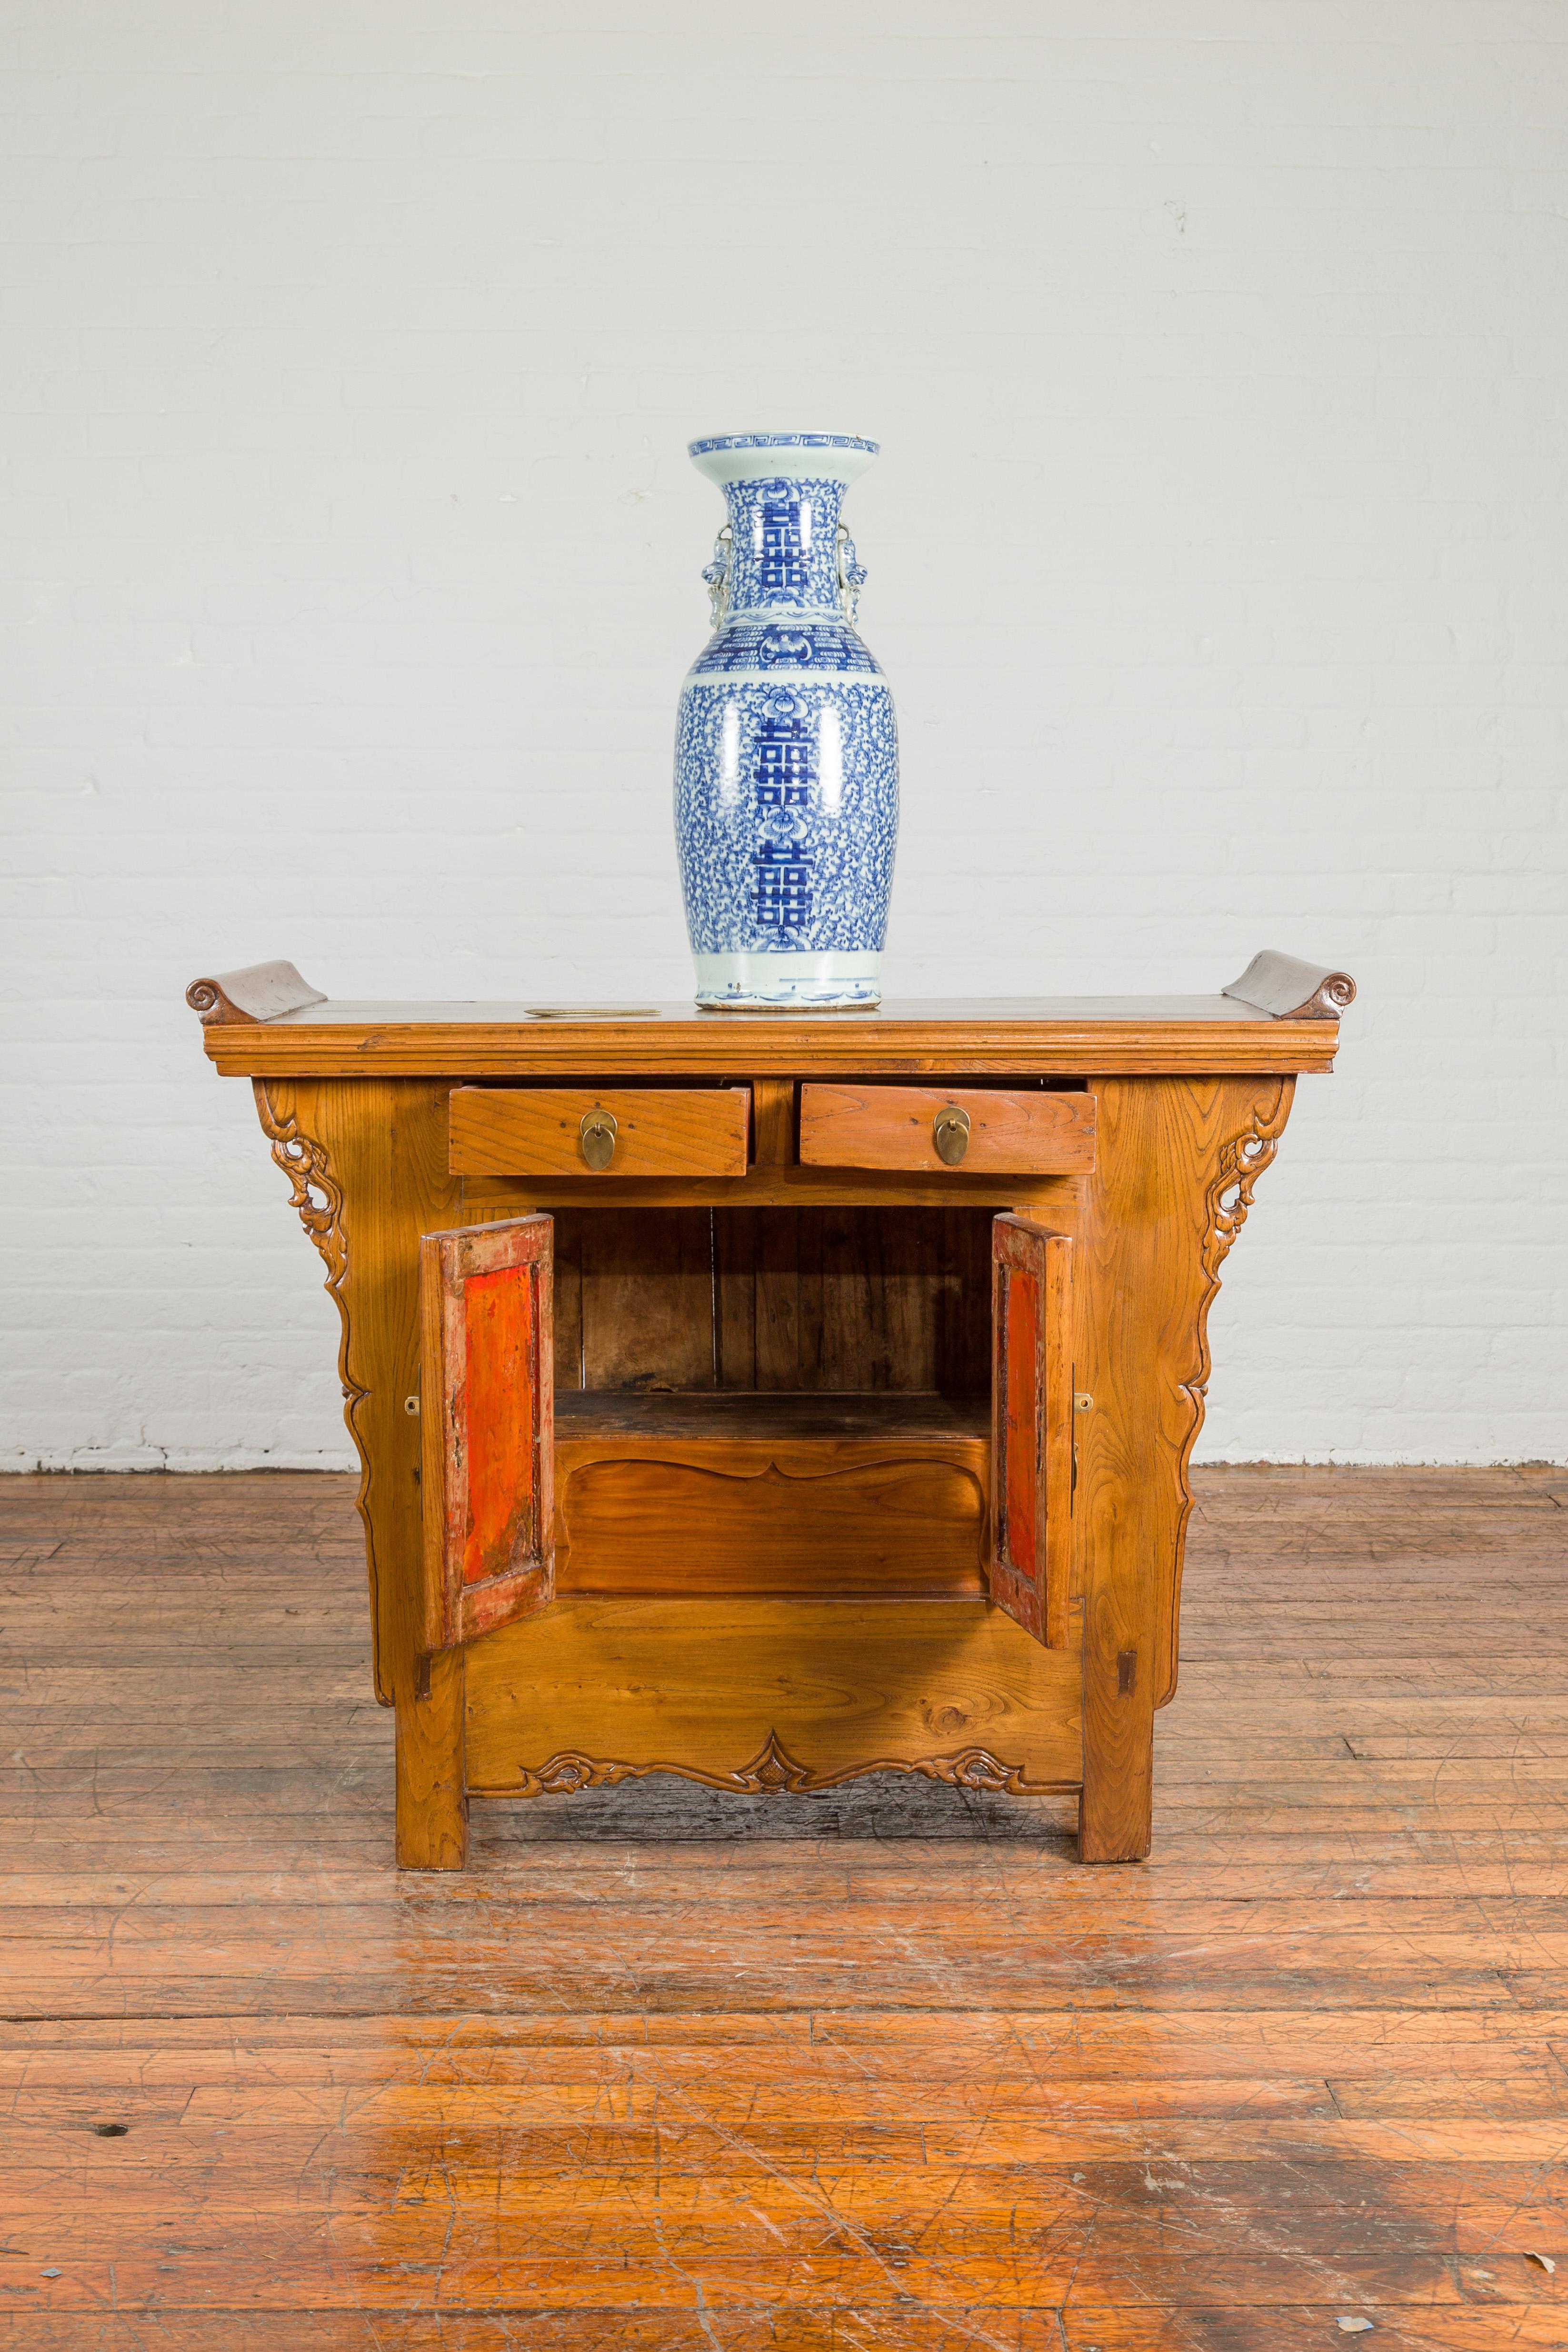 Chinese Qing Dynasty Period 19th Century Altar Cabinet with Natural Finish In Good Condition For Sale In Yonkers, NY